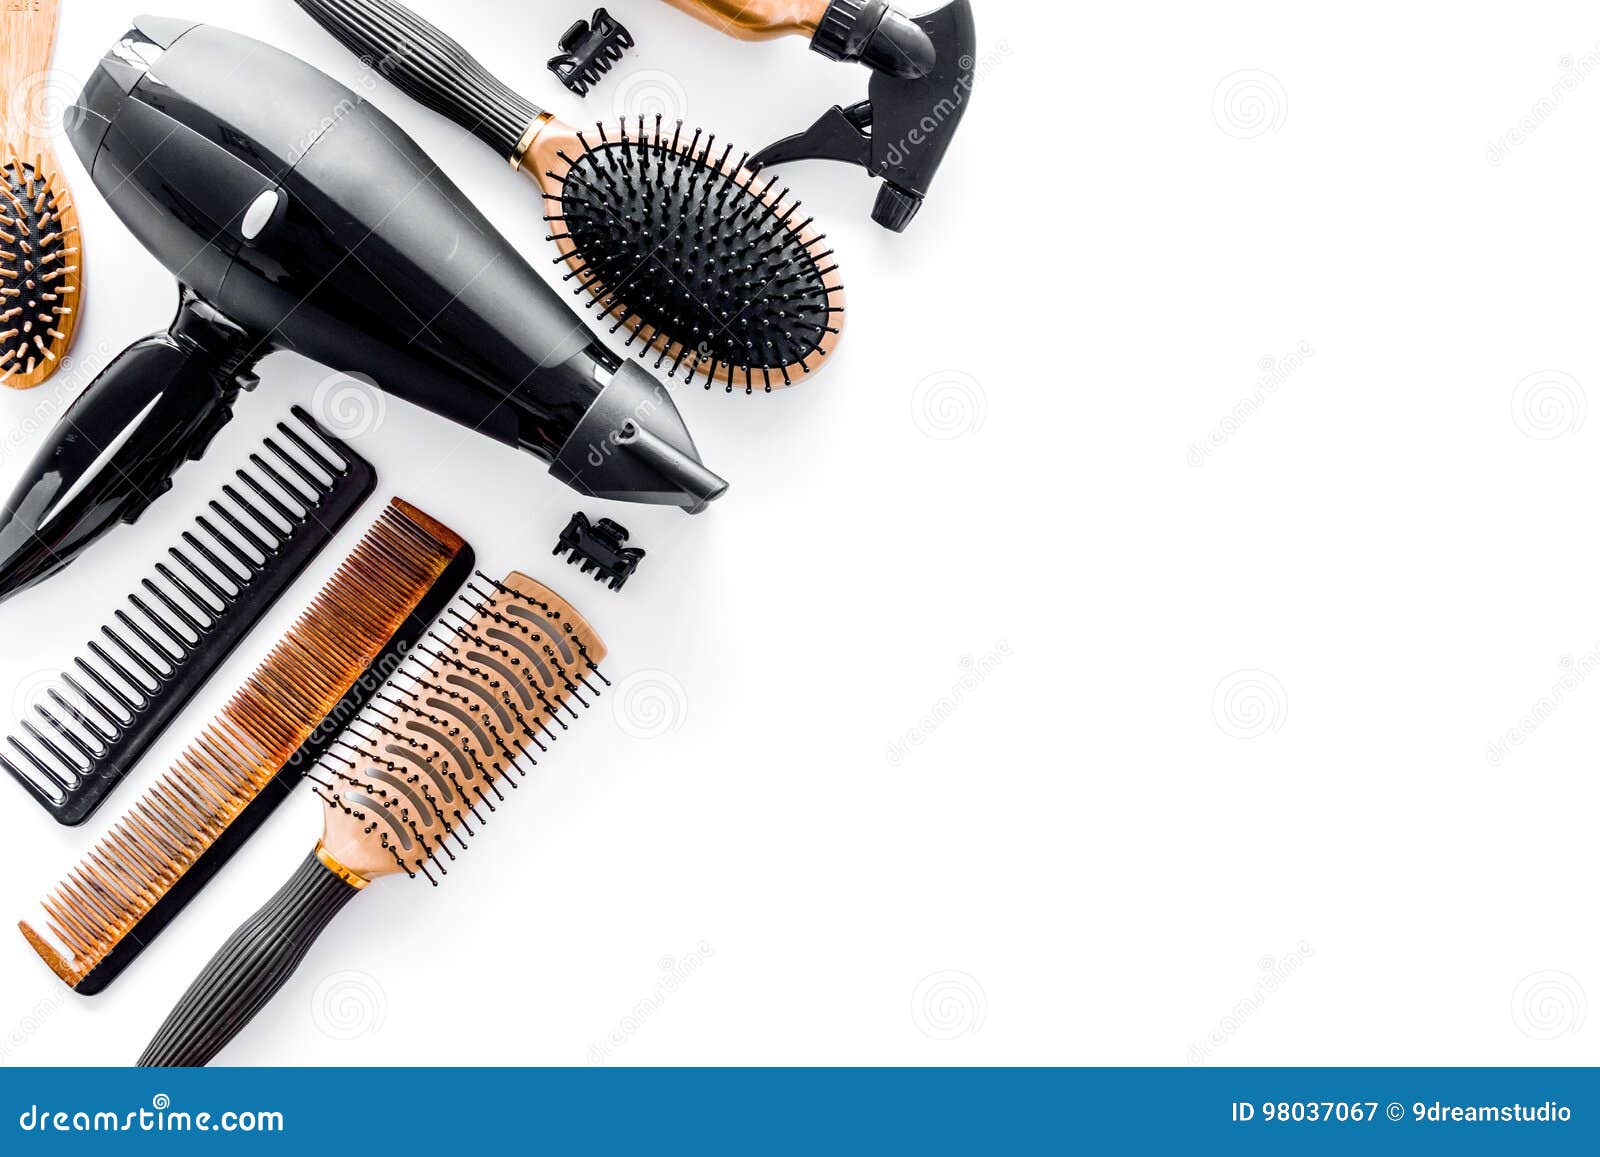 Combs And Hairdresser Tools In Beauty Salon On White Background